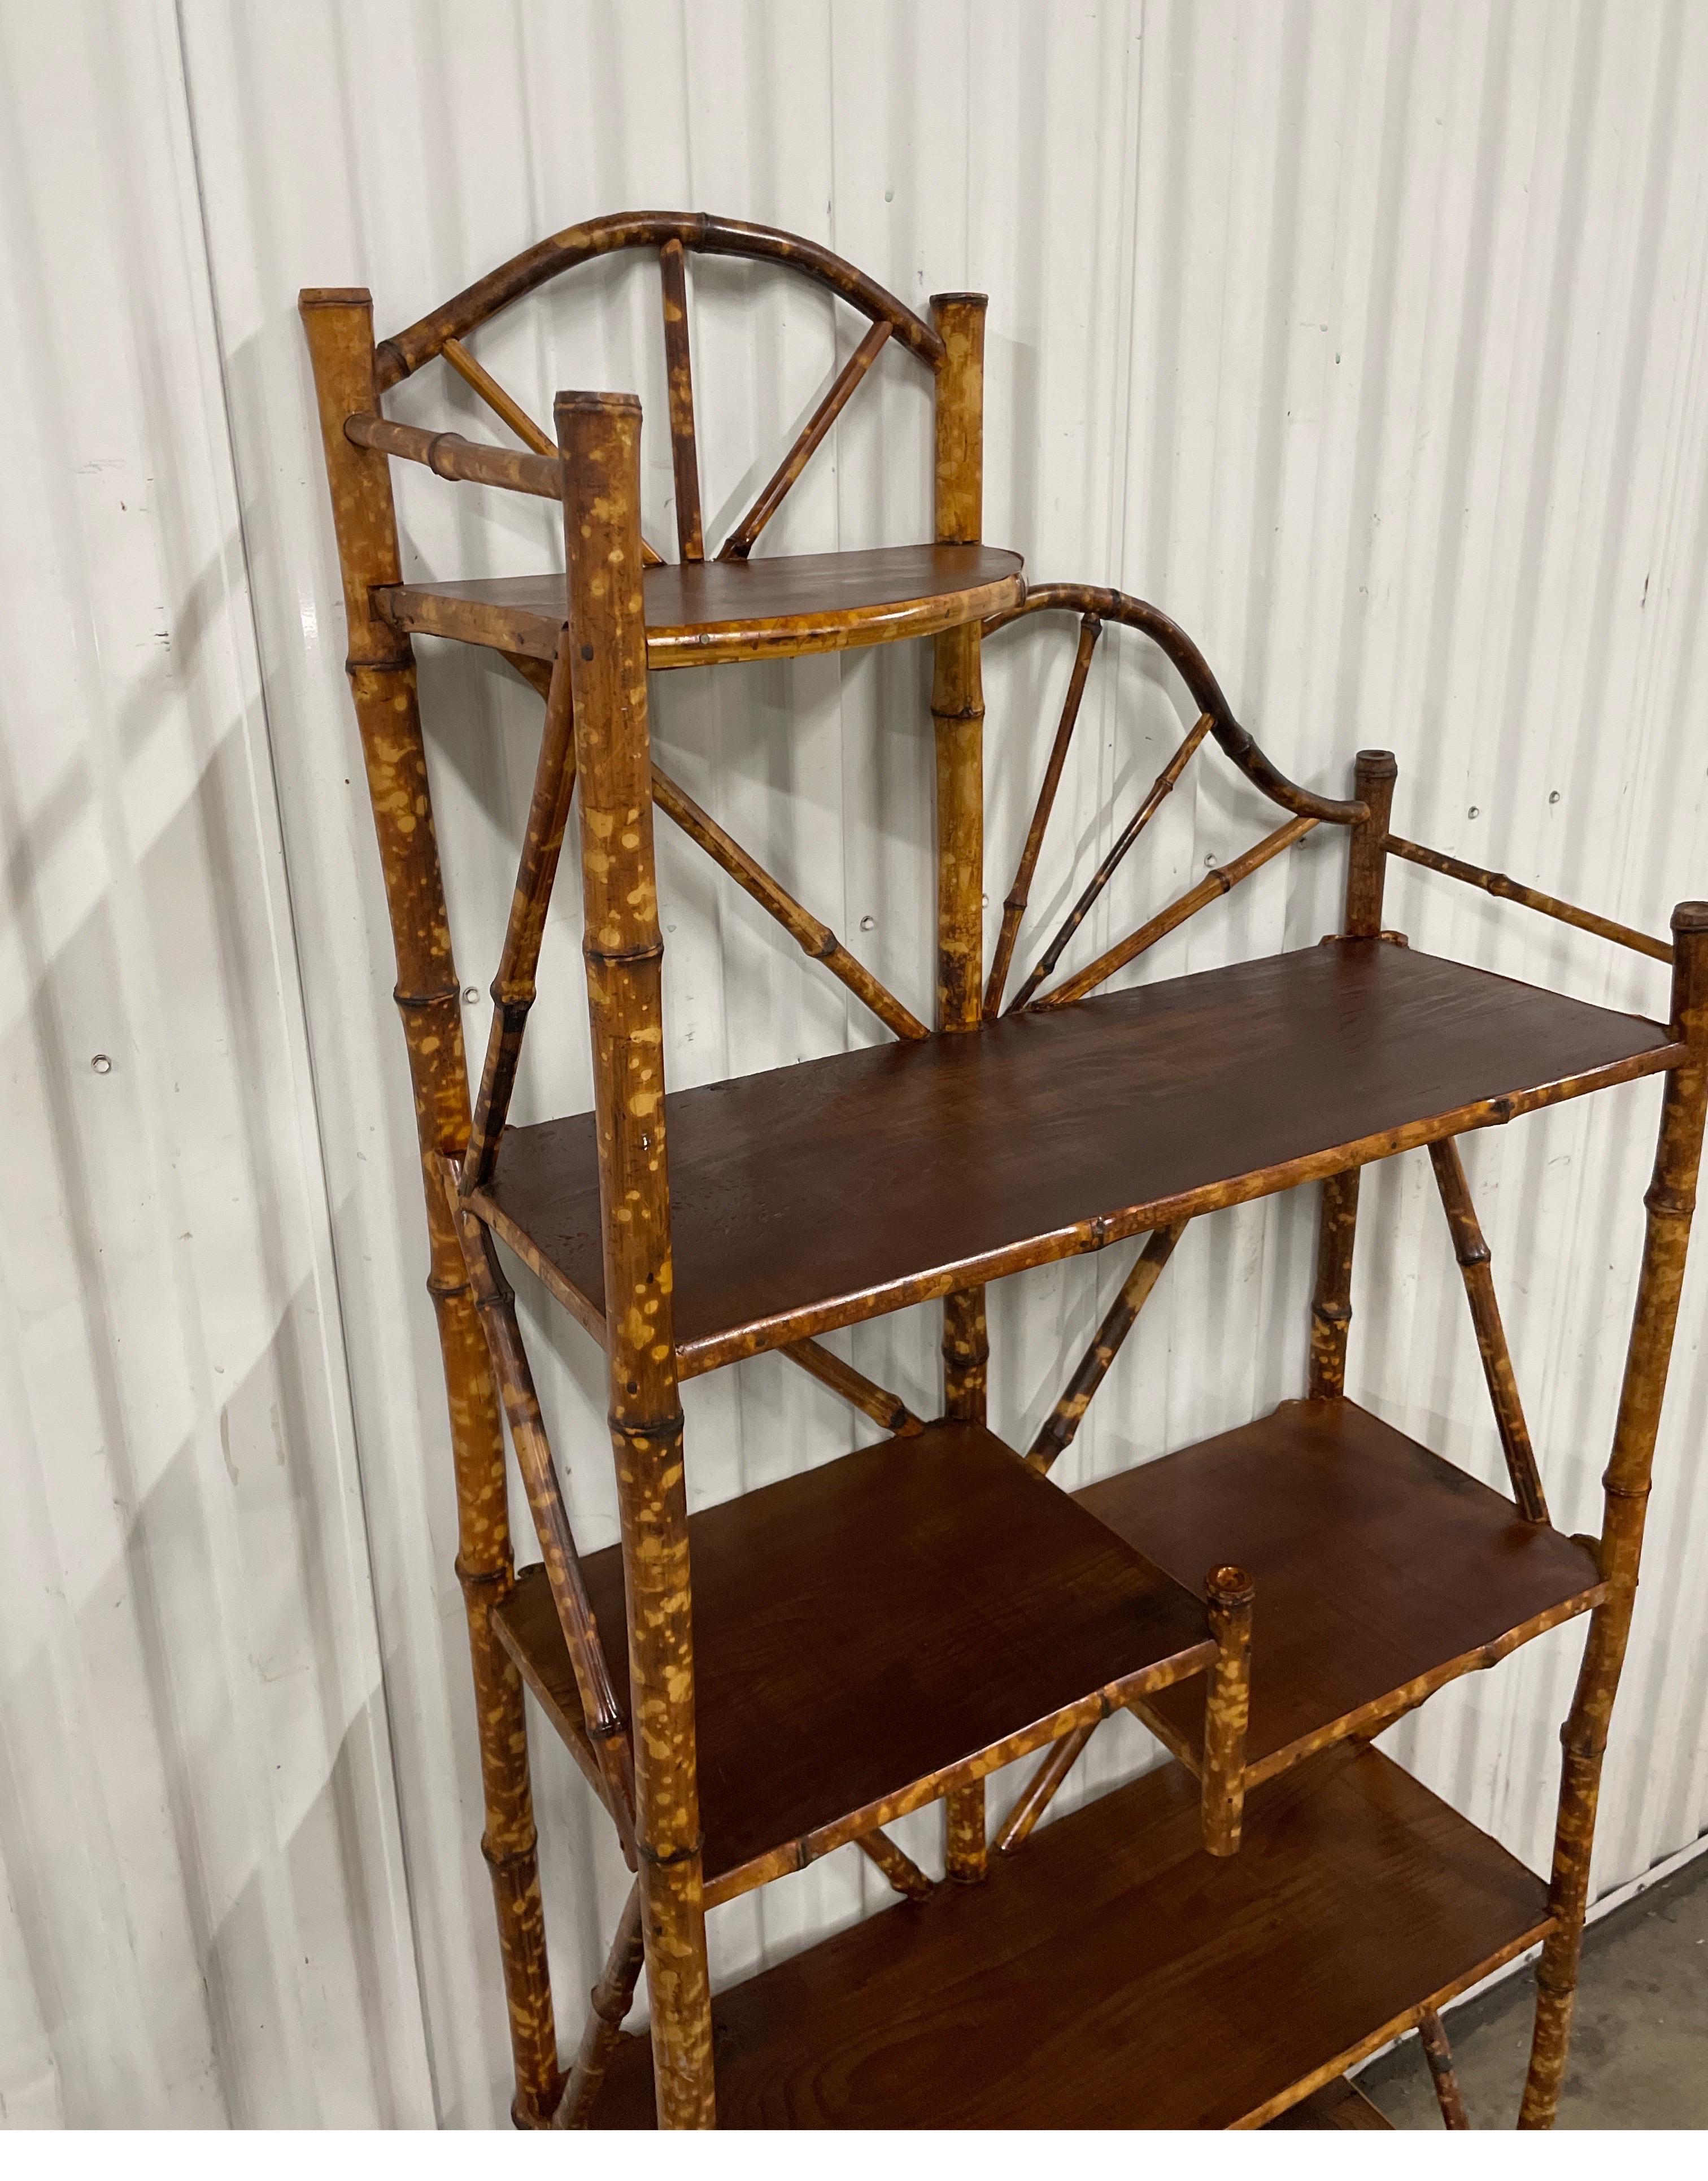 Antique tortoise bamboo etagere / shelves to display your favorite pieces. Consisting of six separate shelves. Very versatile piece that will fit in almost any setting.